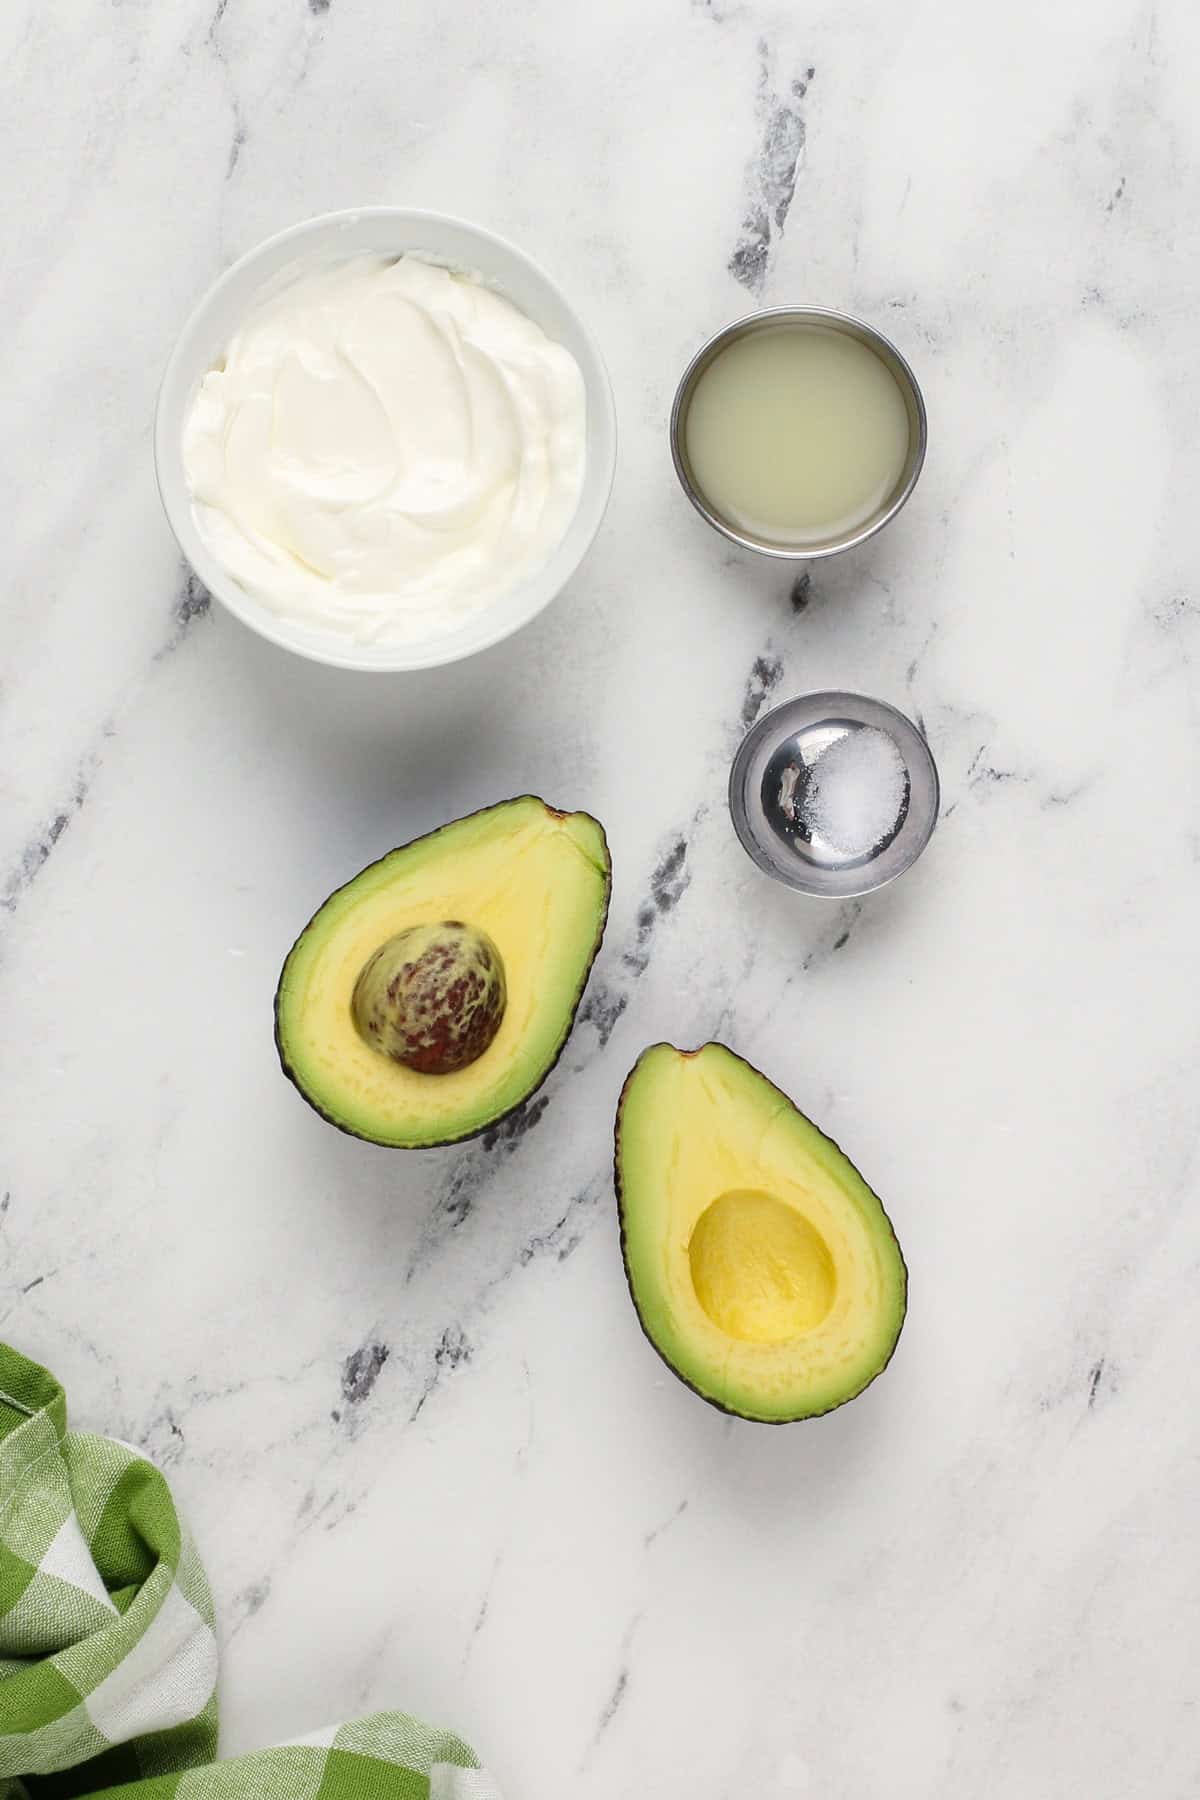 Ingredients for avocado crema arranged on a marble countertop.